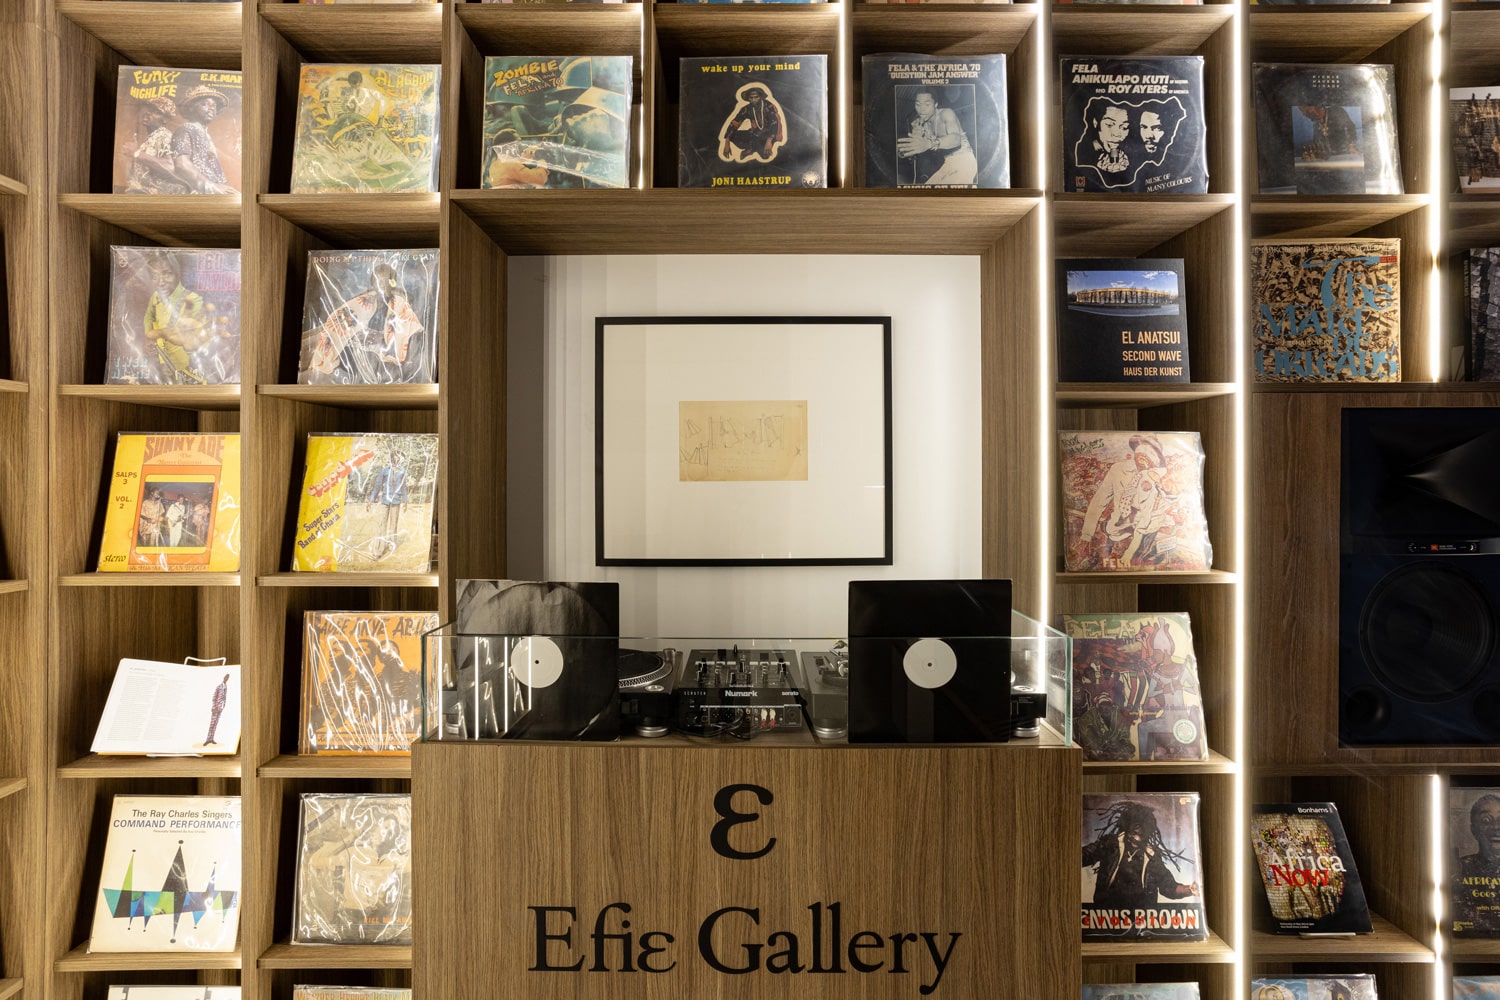 Music,-Fluidity-and-Reinvention_-El-Anatsuis-Record-Collection-installation-image-2.-Courtesy-of-Efie-Gallery